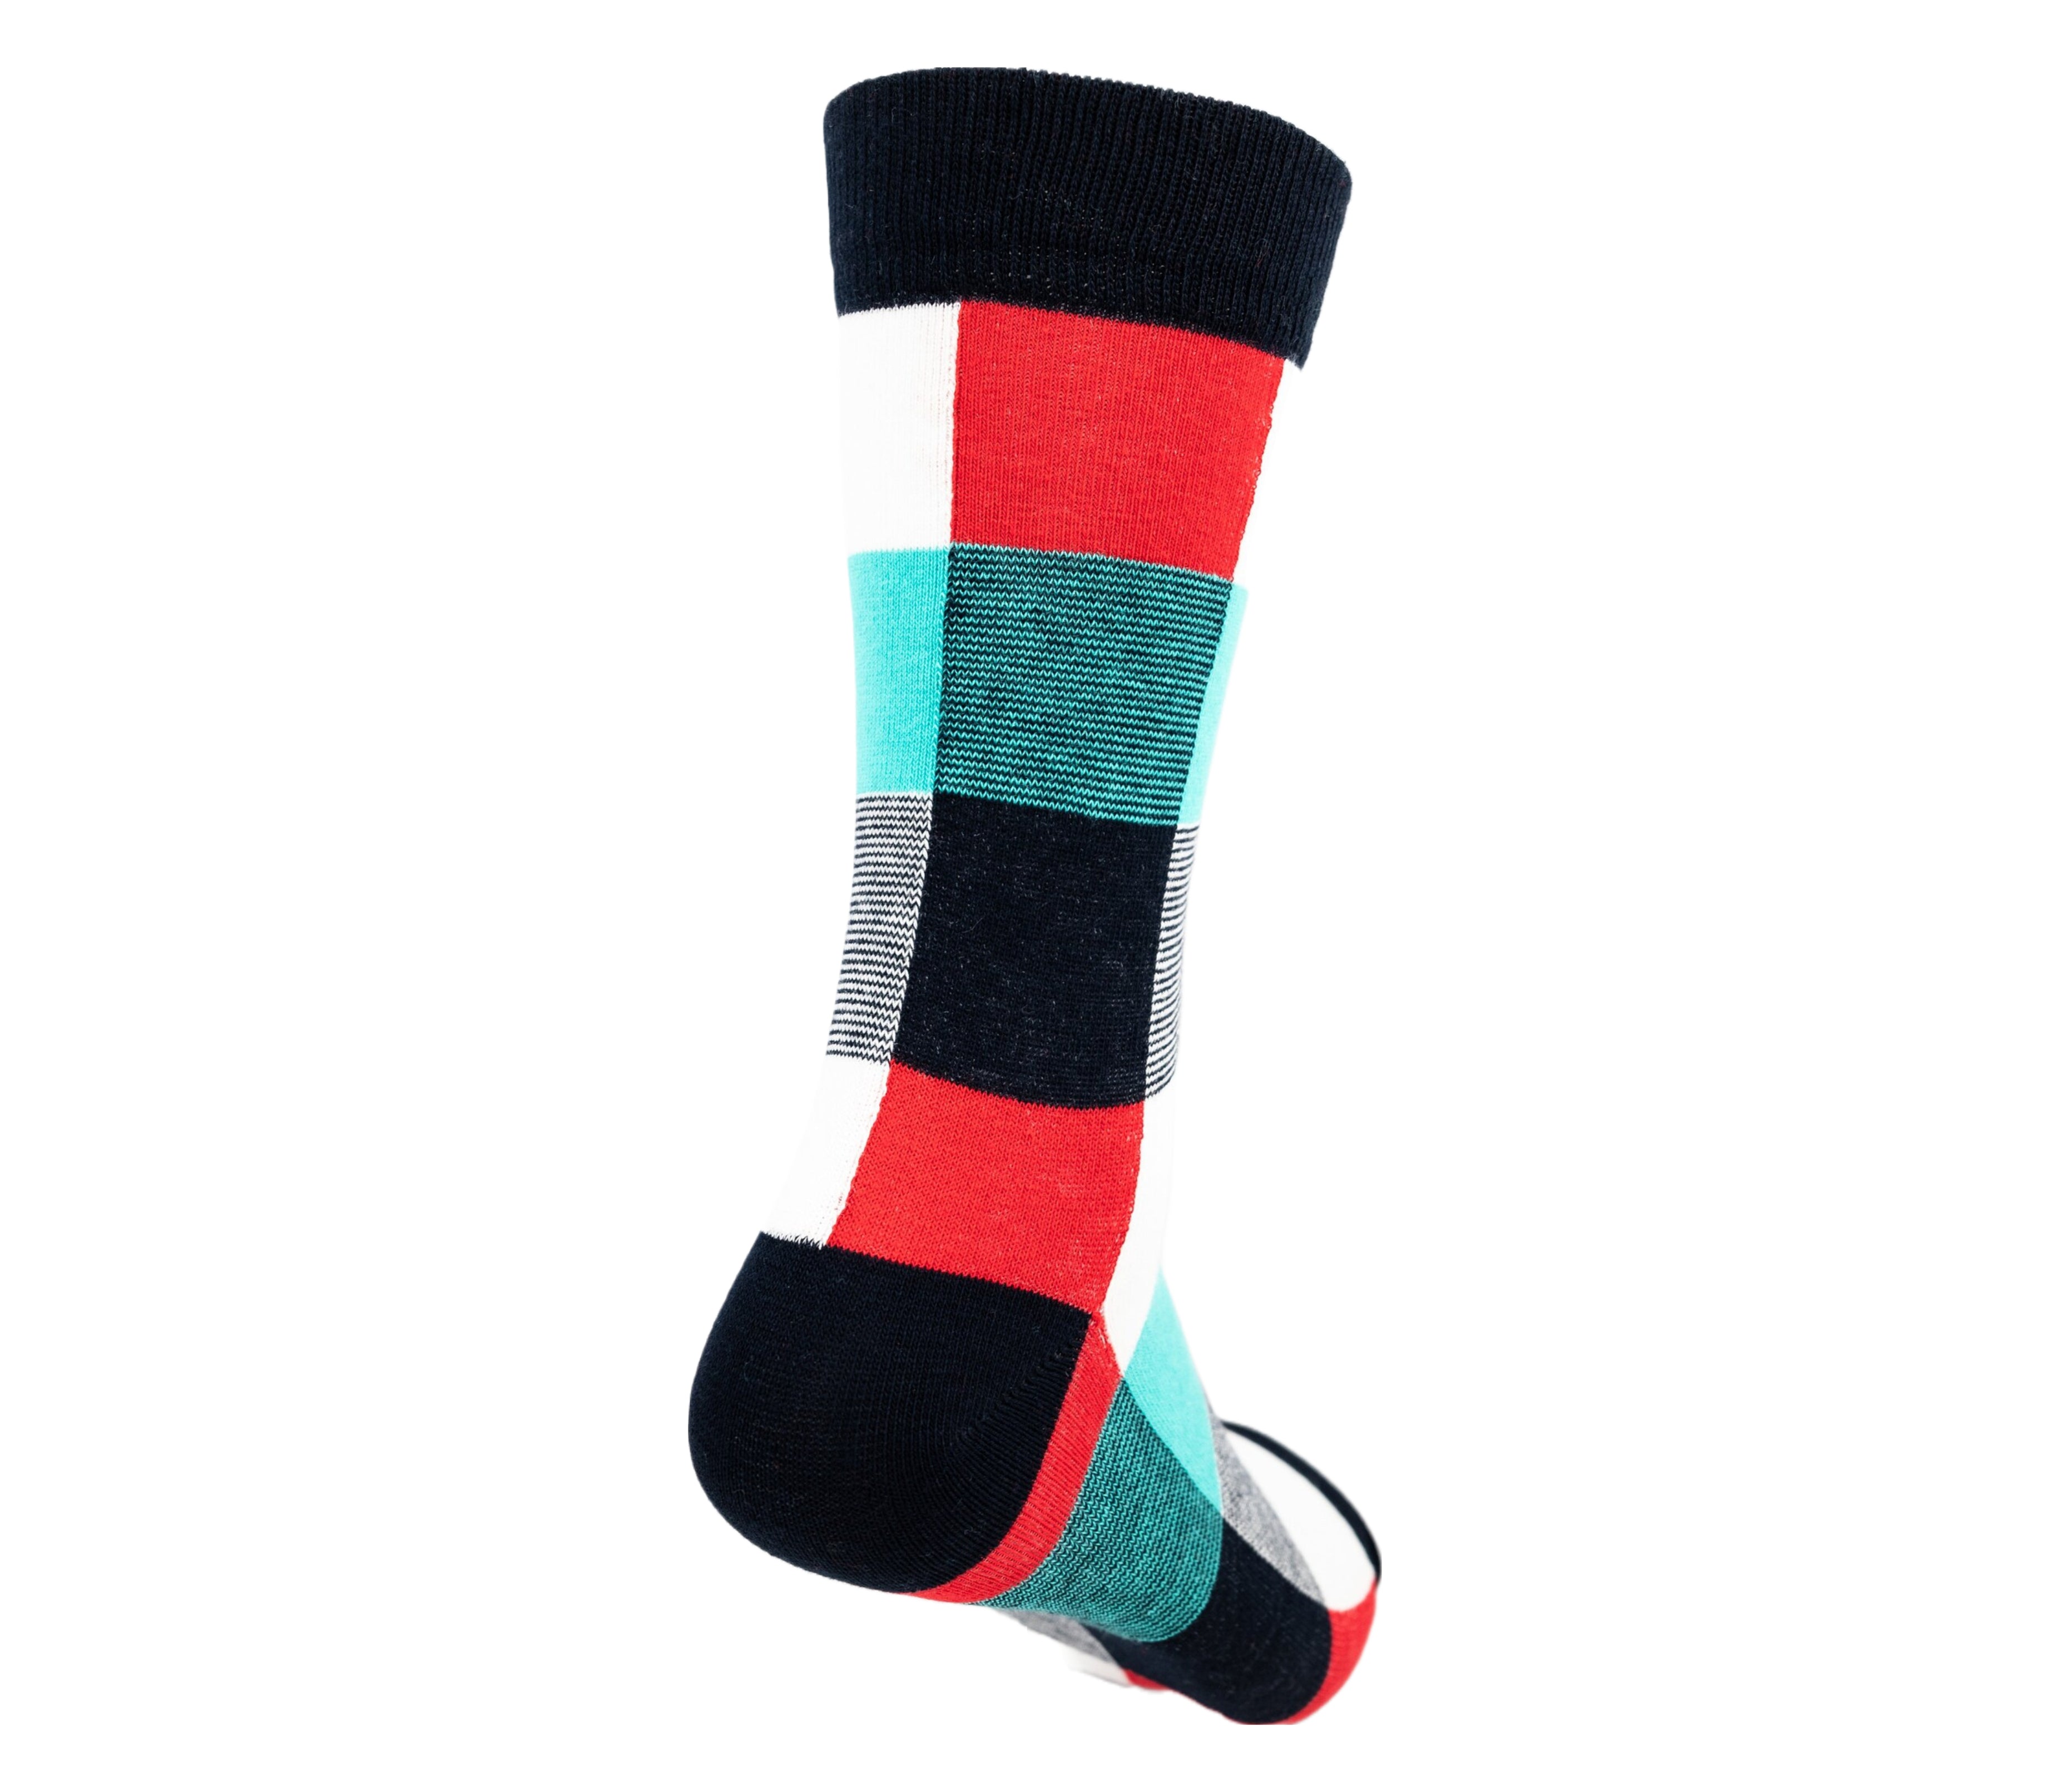 Colorful Square Pattern Socks from the Sock Panda (Adult Large)